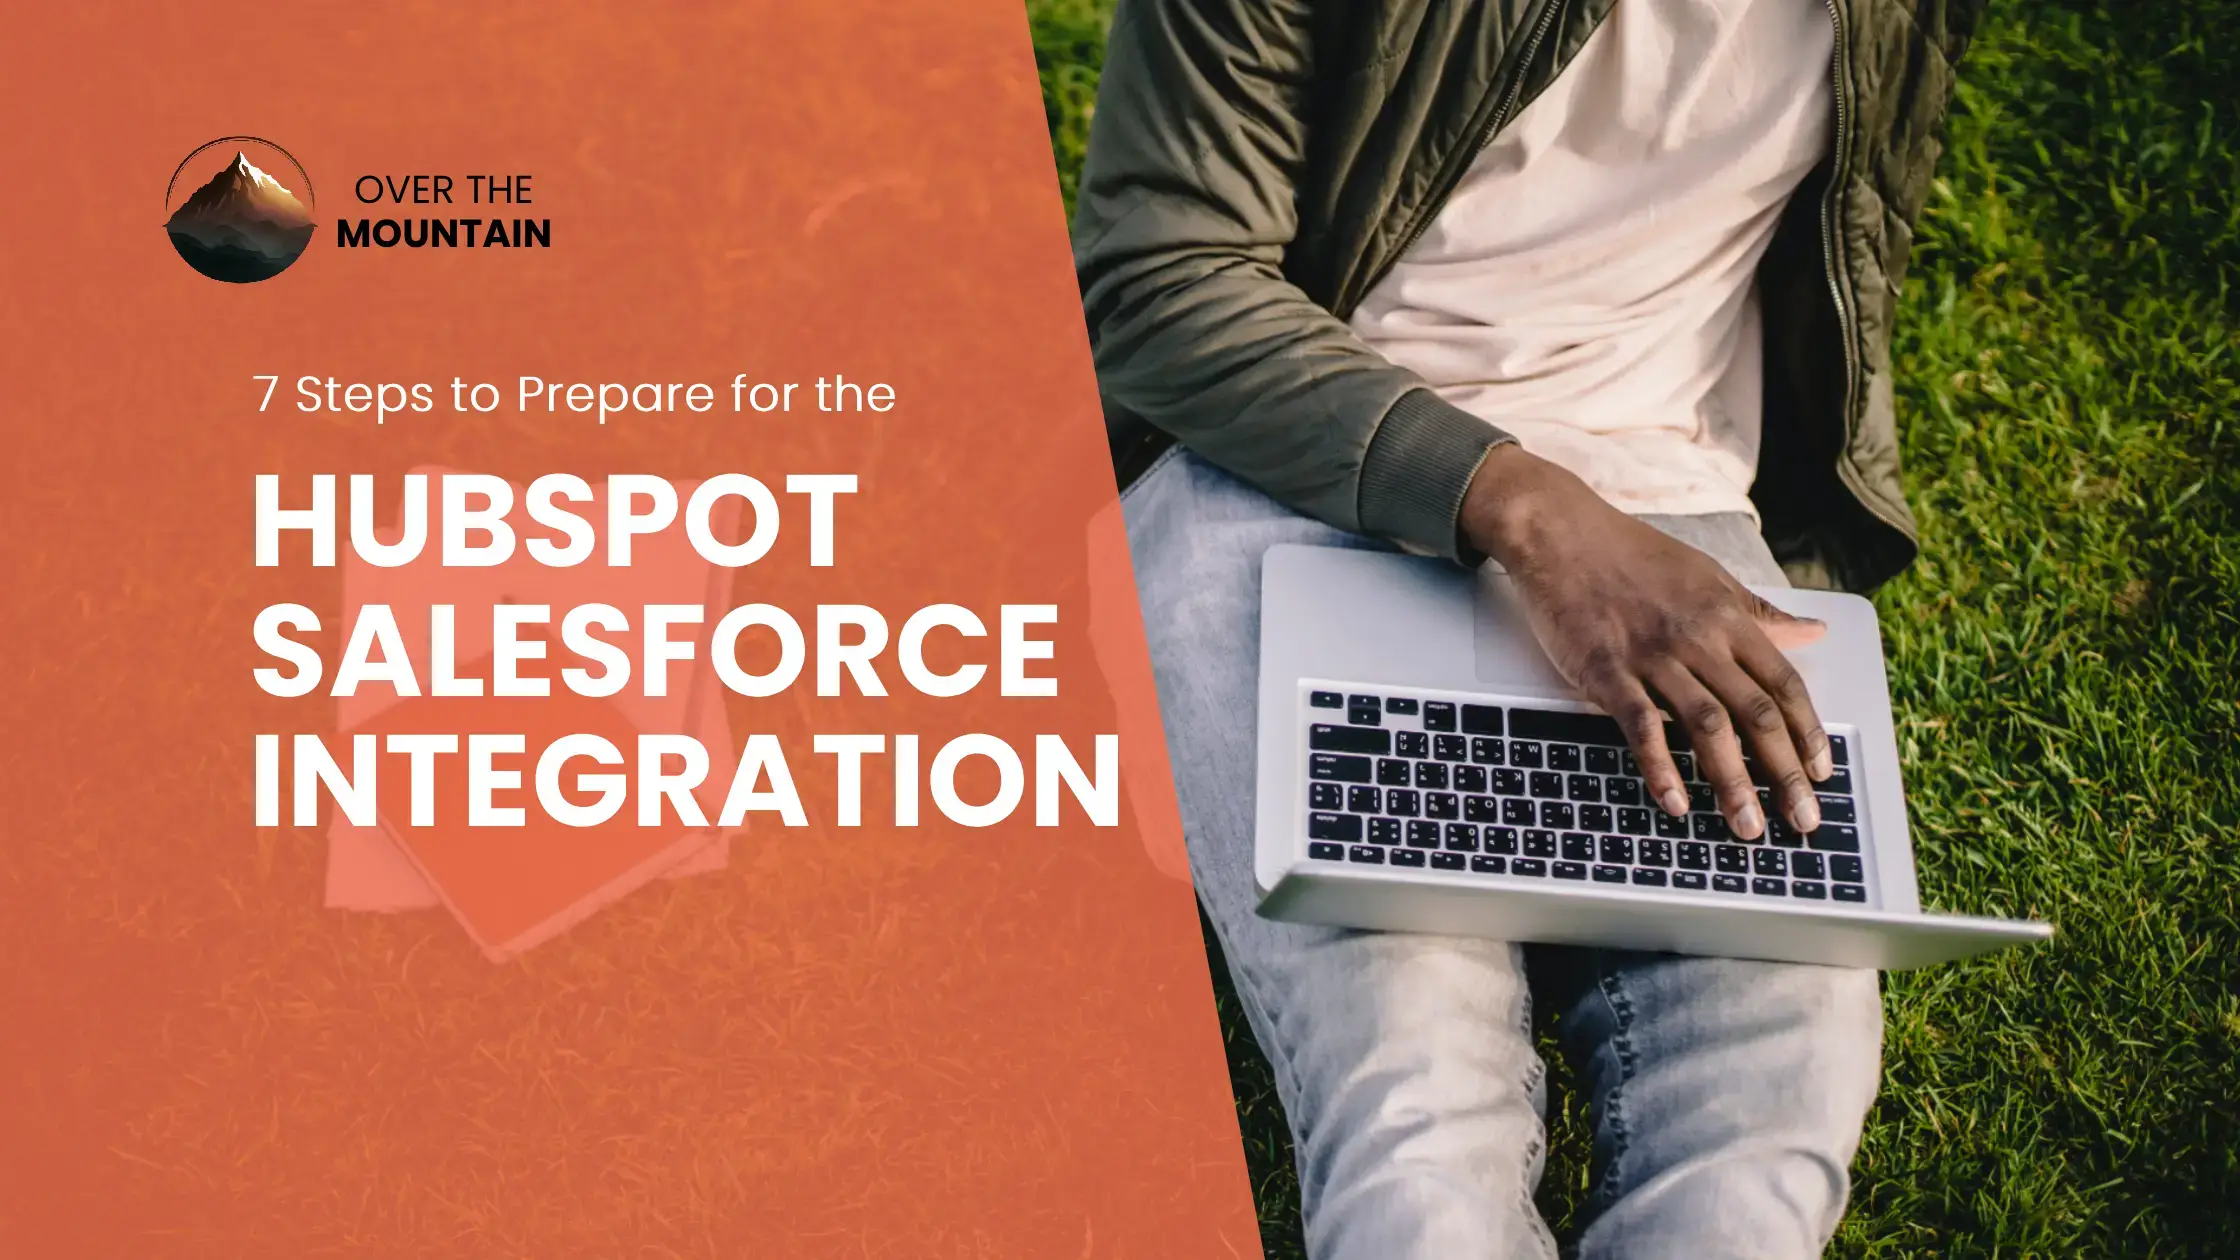 7 Steps to Prepare for the HubSpot Salesforce Integration